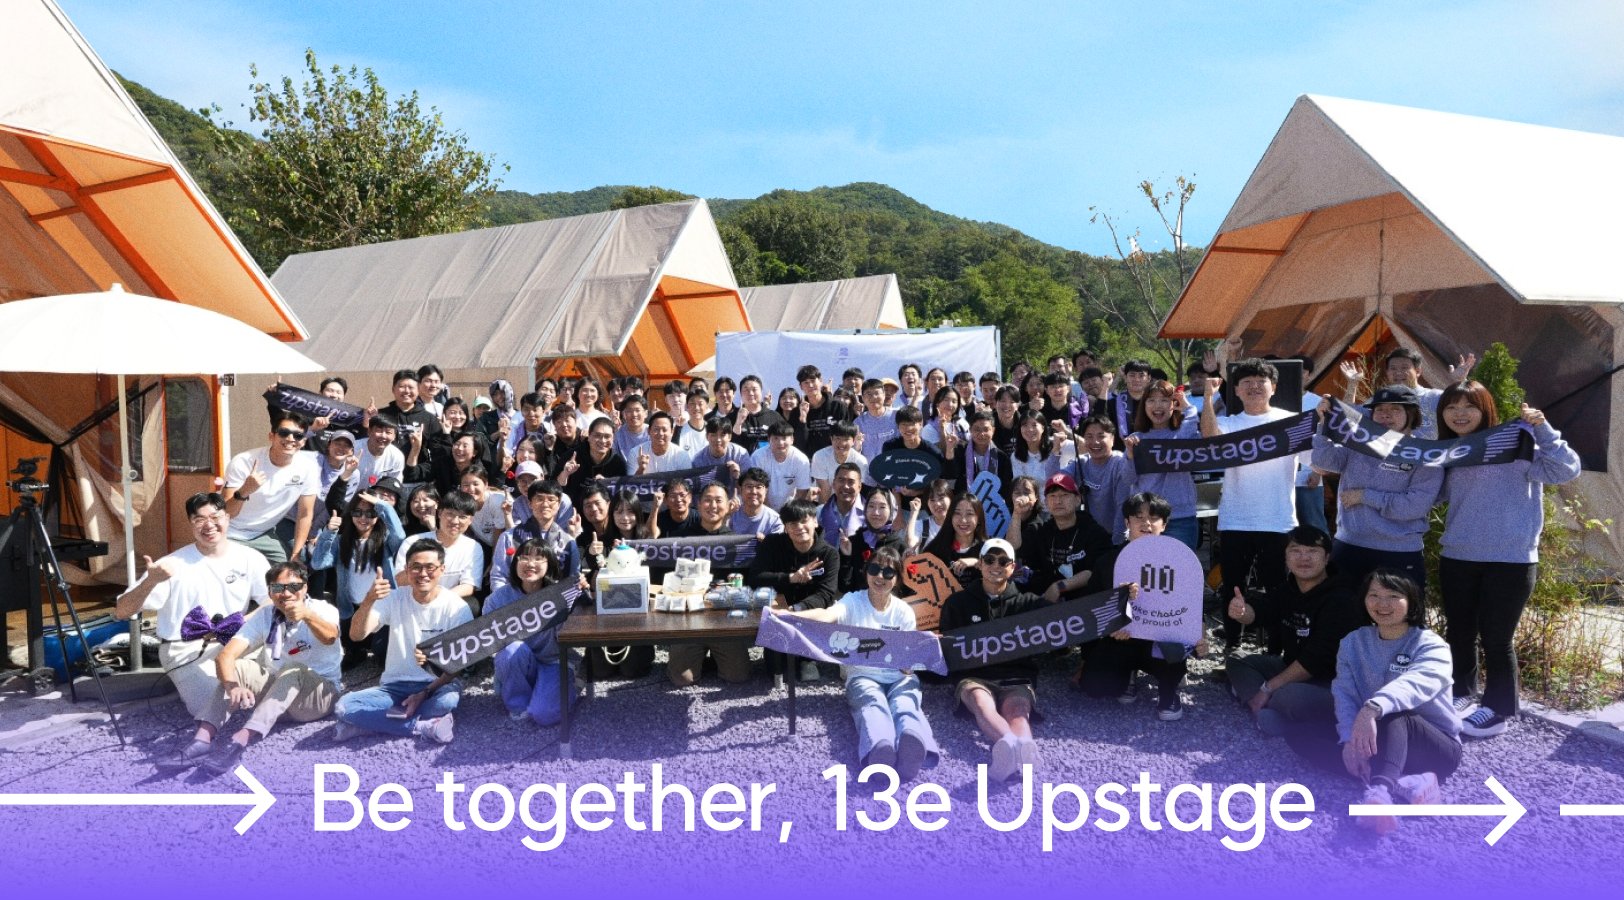 Upstage Fall Picnic - Be together, 13e Upstage